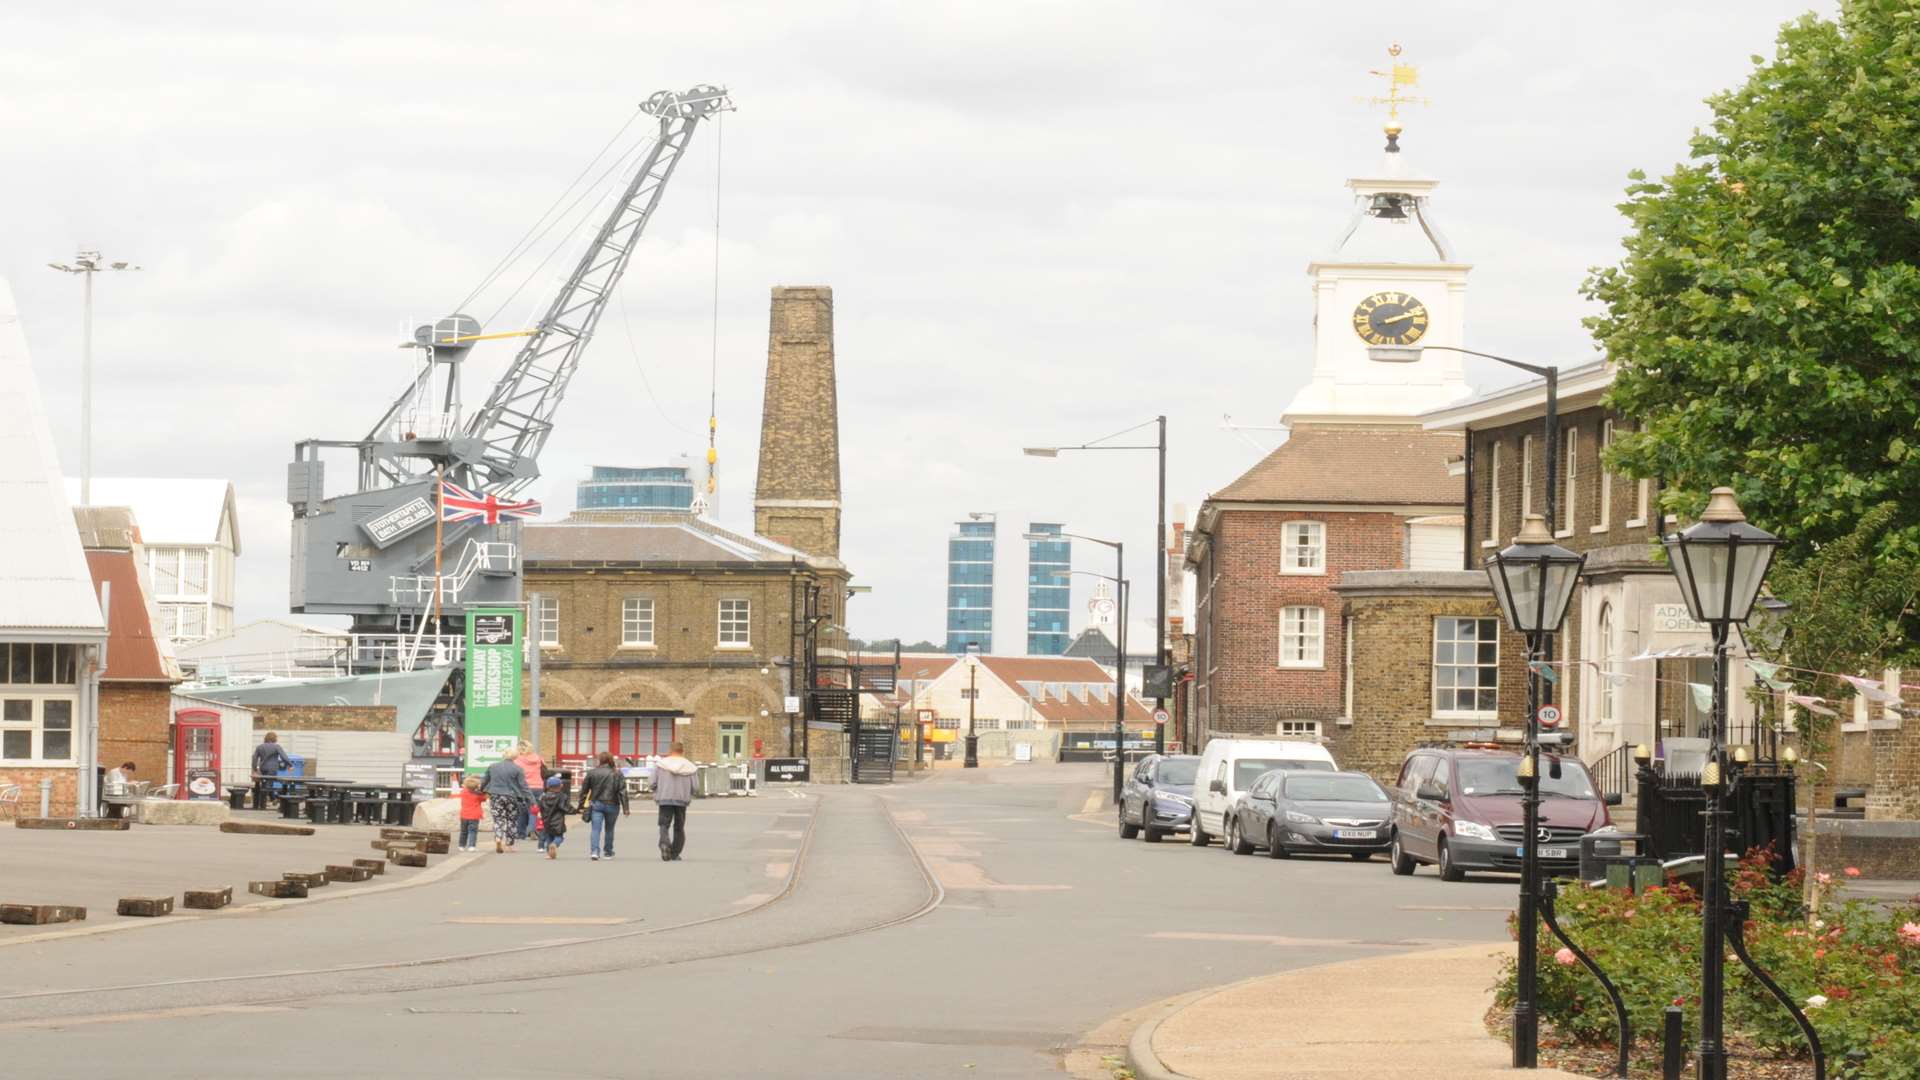 Chatham Dockyard has said it will close on Tuesday